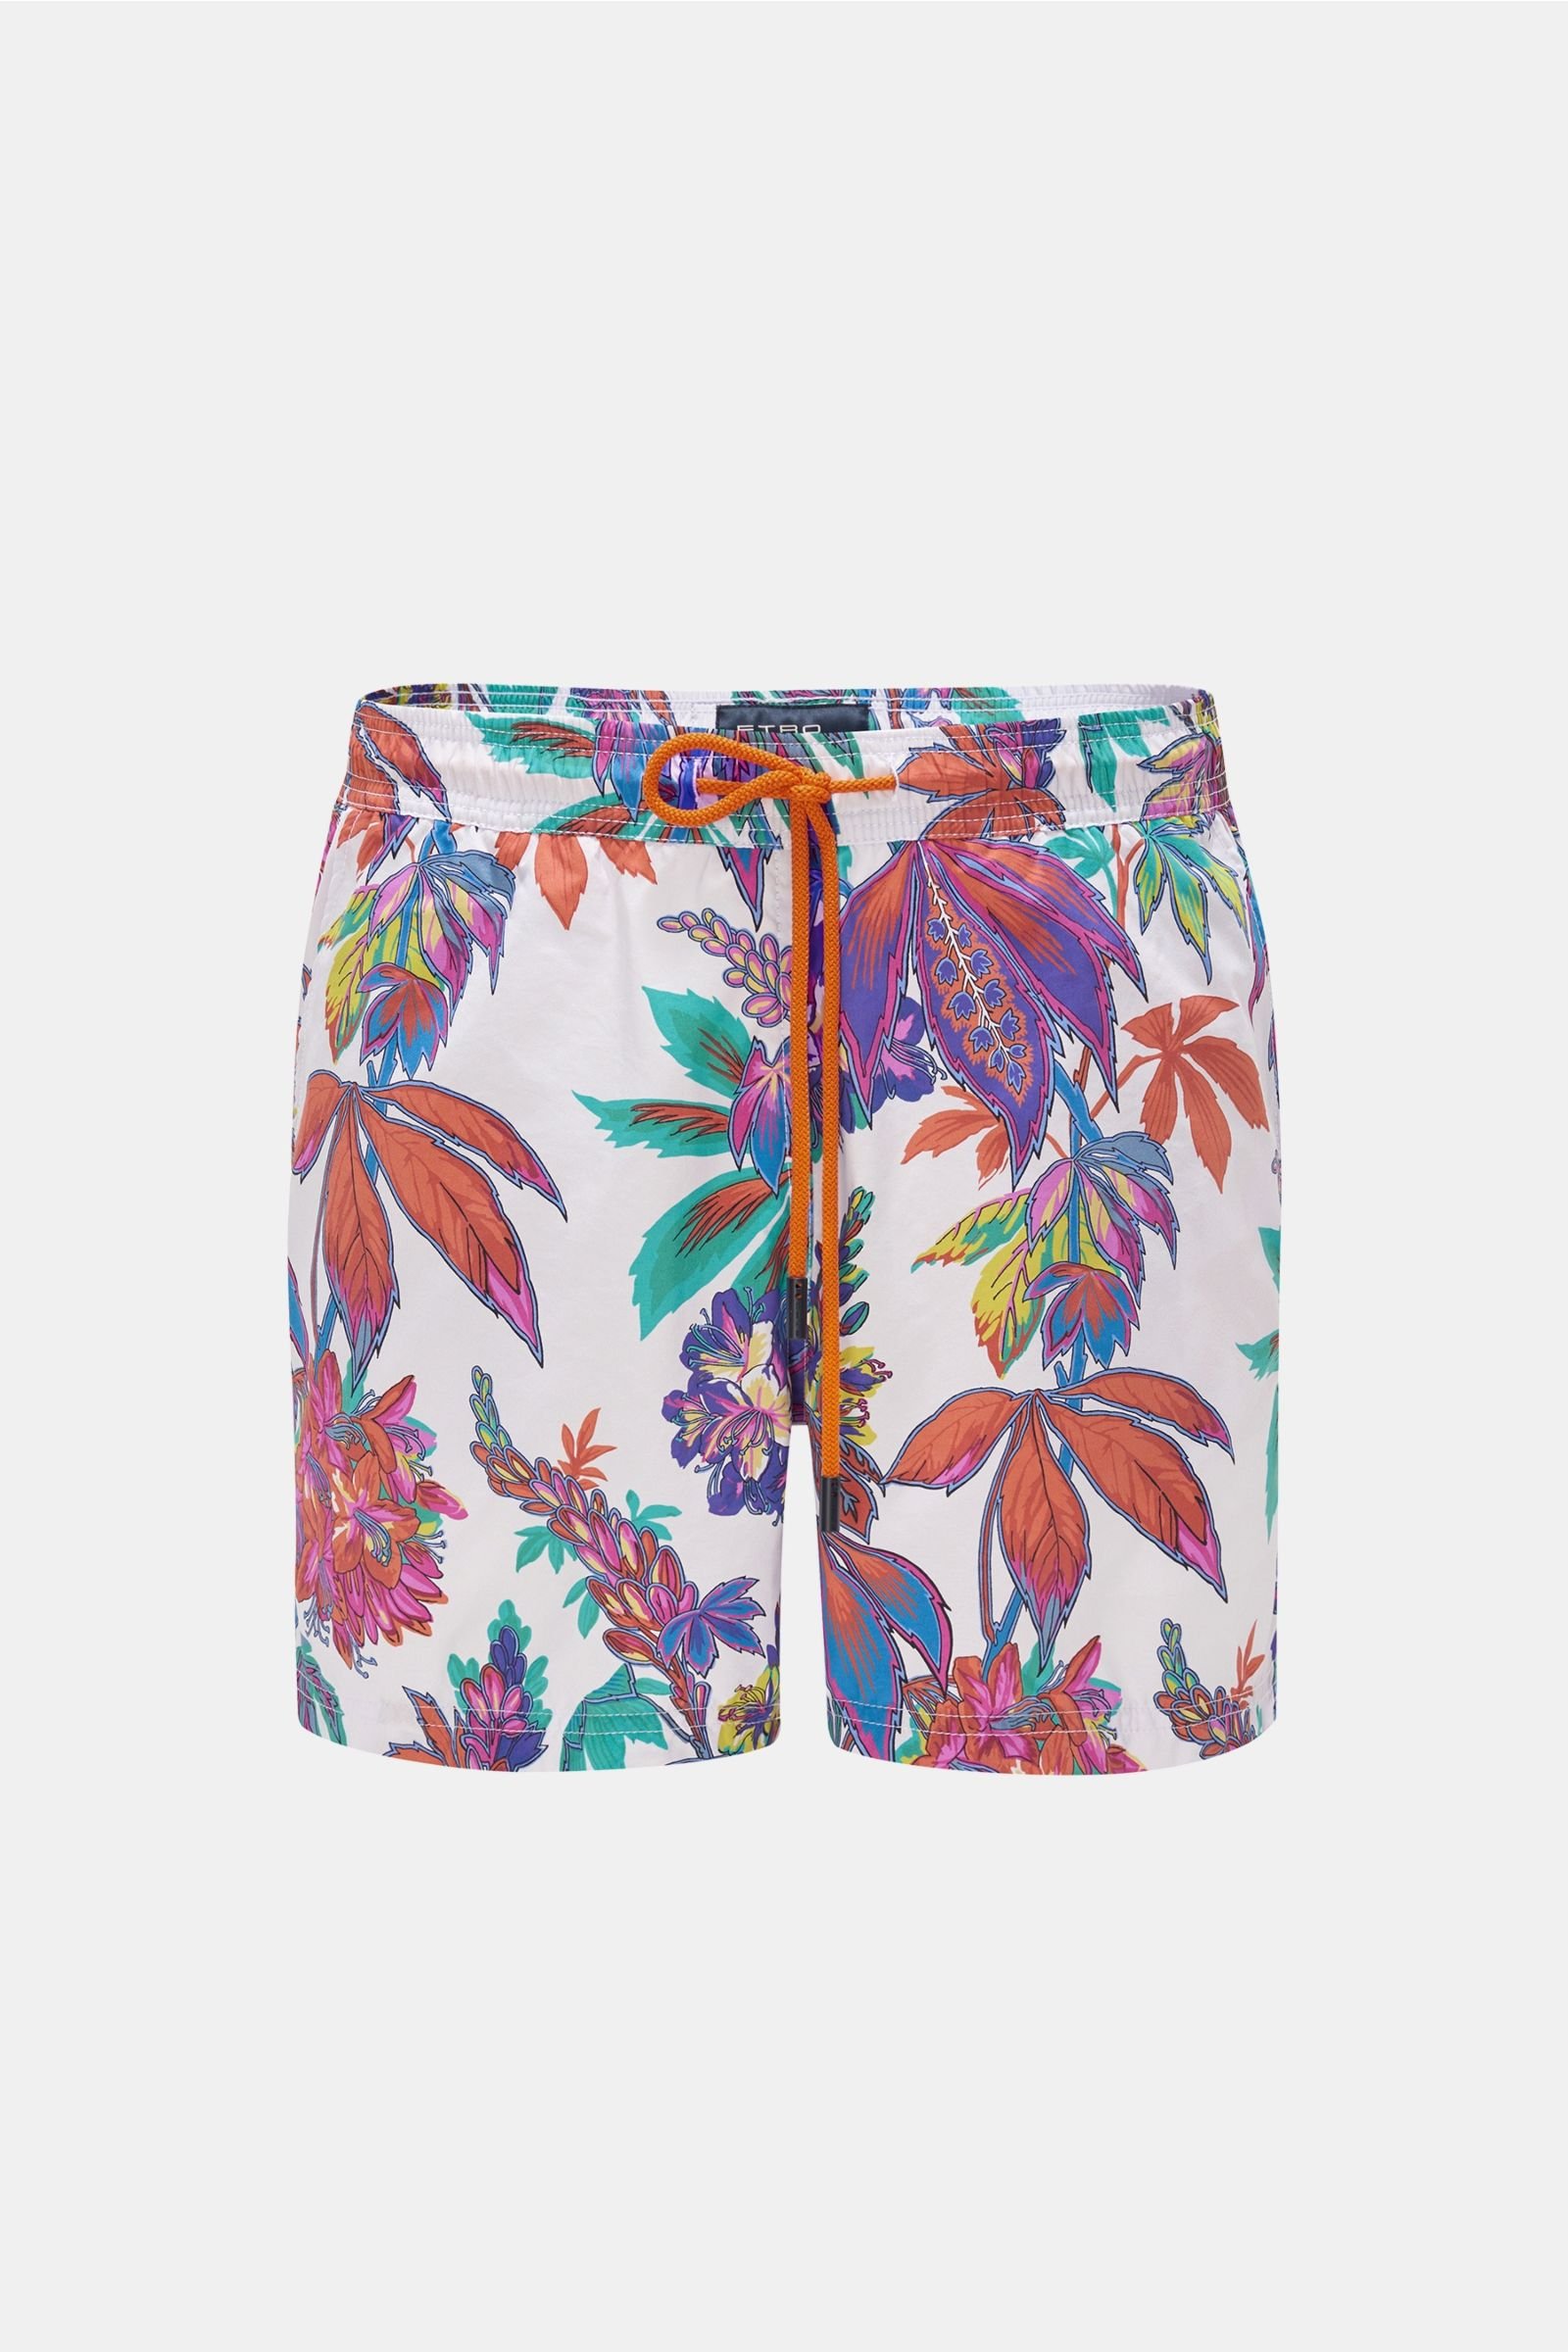 Swim shorts white/red patterned